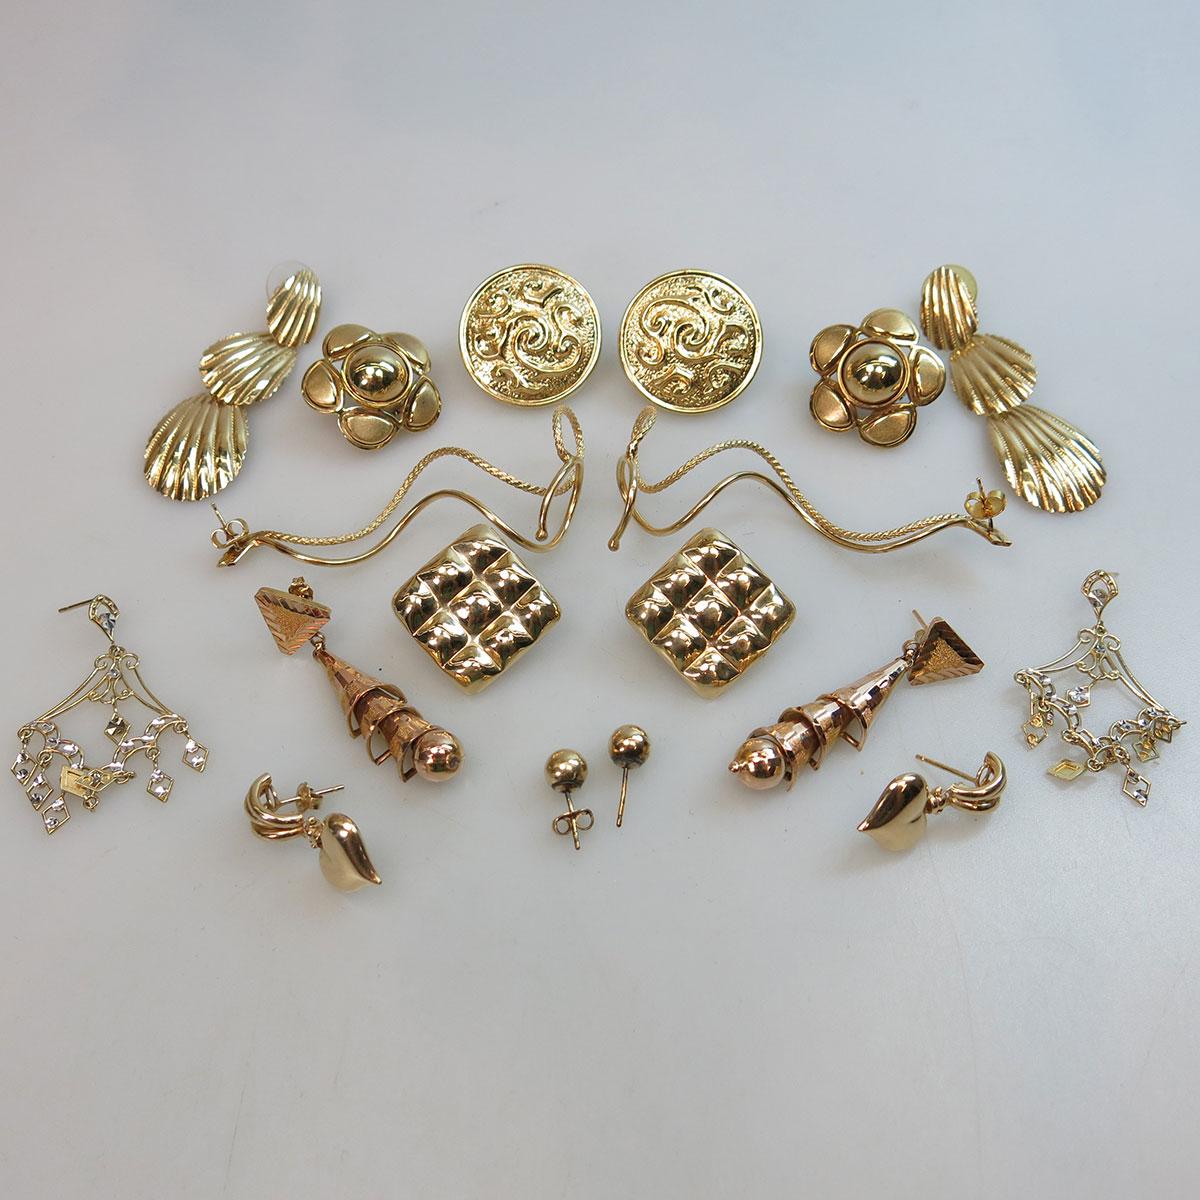 9 Pairs Of Yellow Gold Earrings